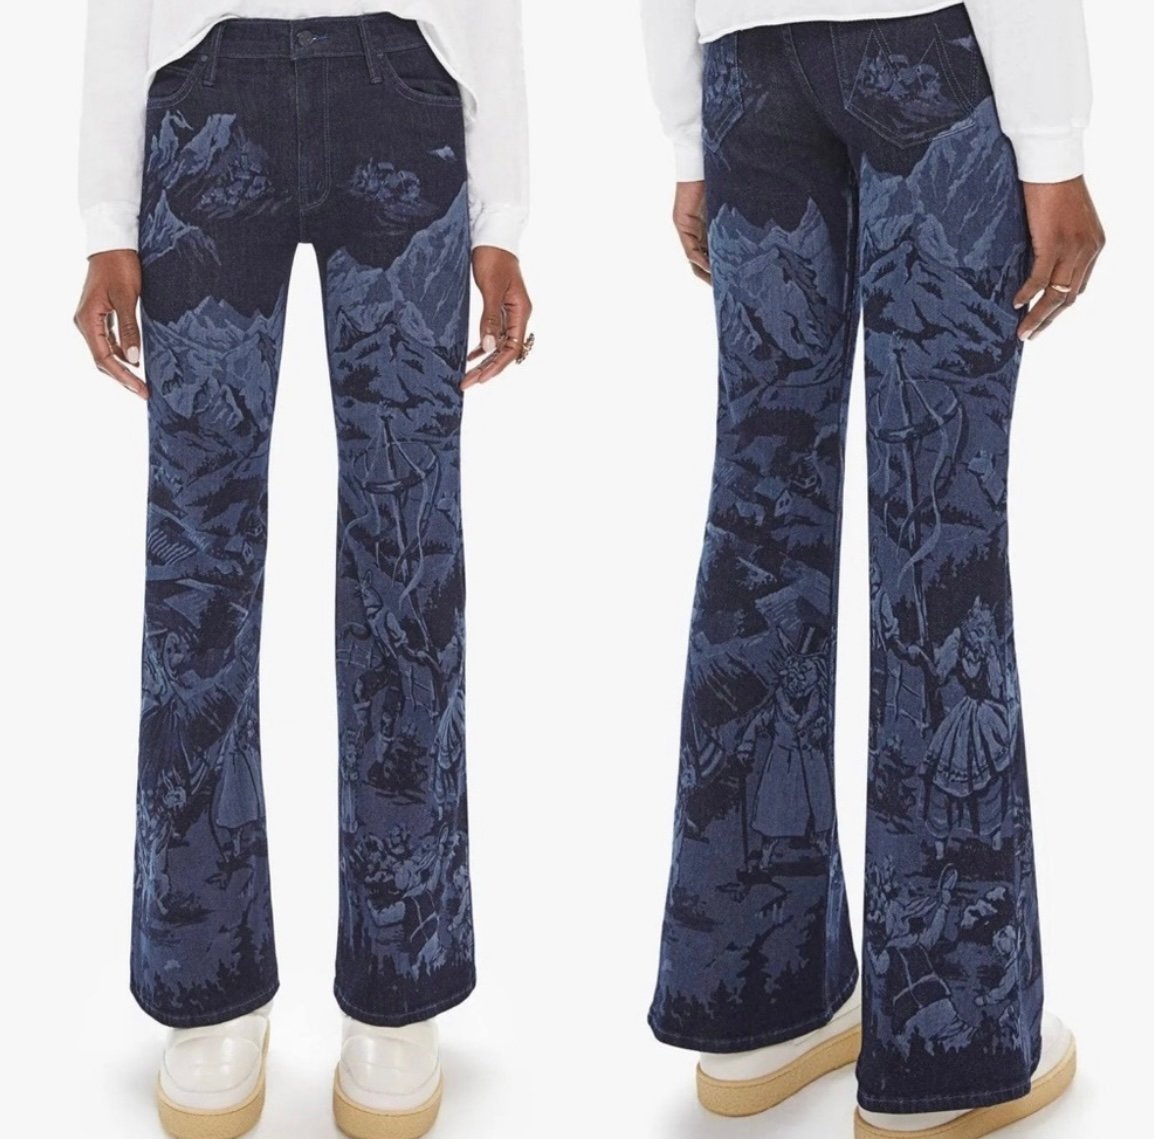 high discount Mother The Doozy Sneak Swiss Alps Jean 26 NWT gXHi1M82S Buying Cheap